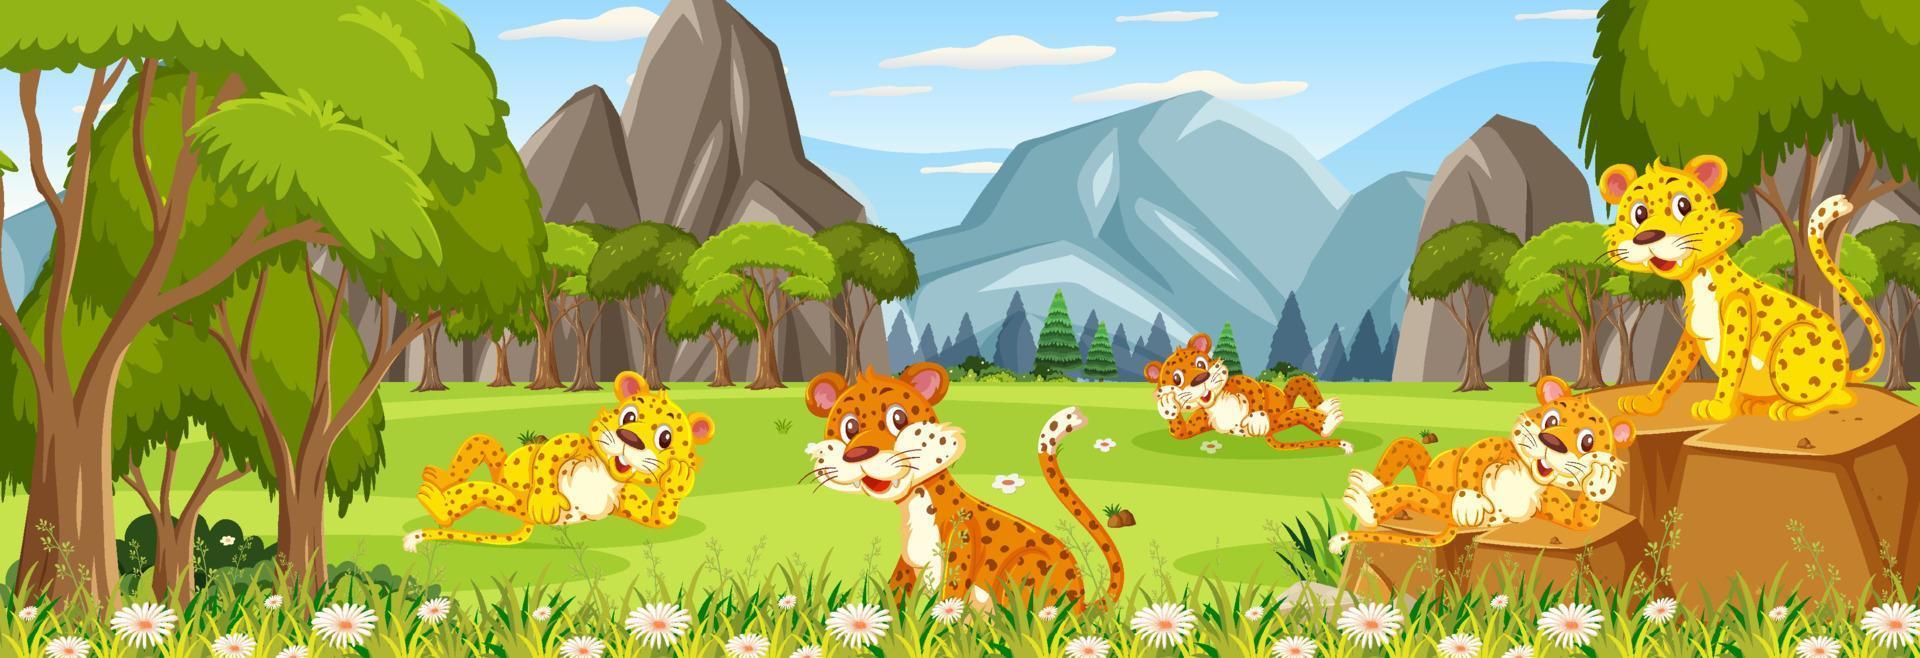 Outdoor panorama scene with many leoprads in the forest vector